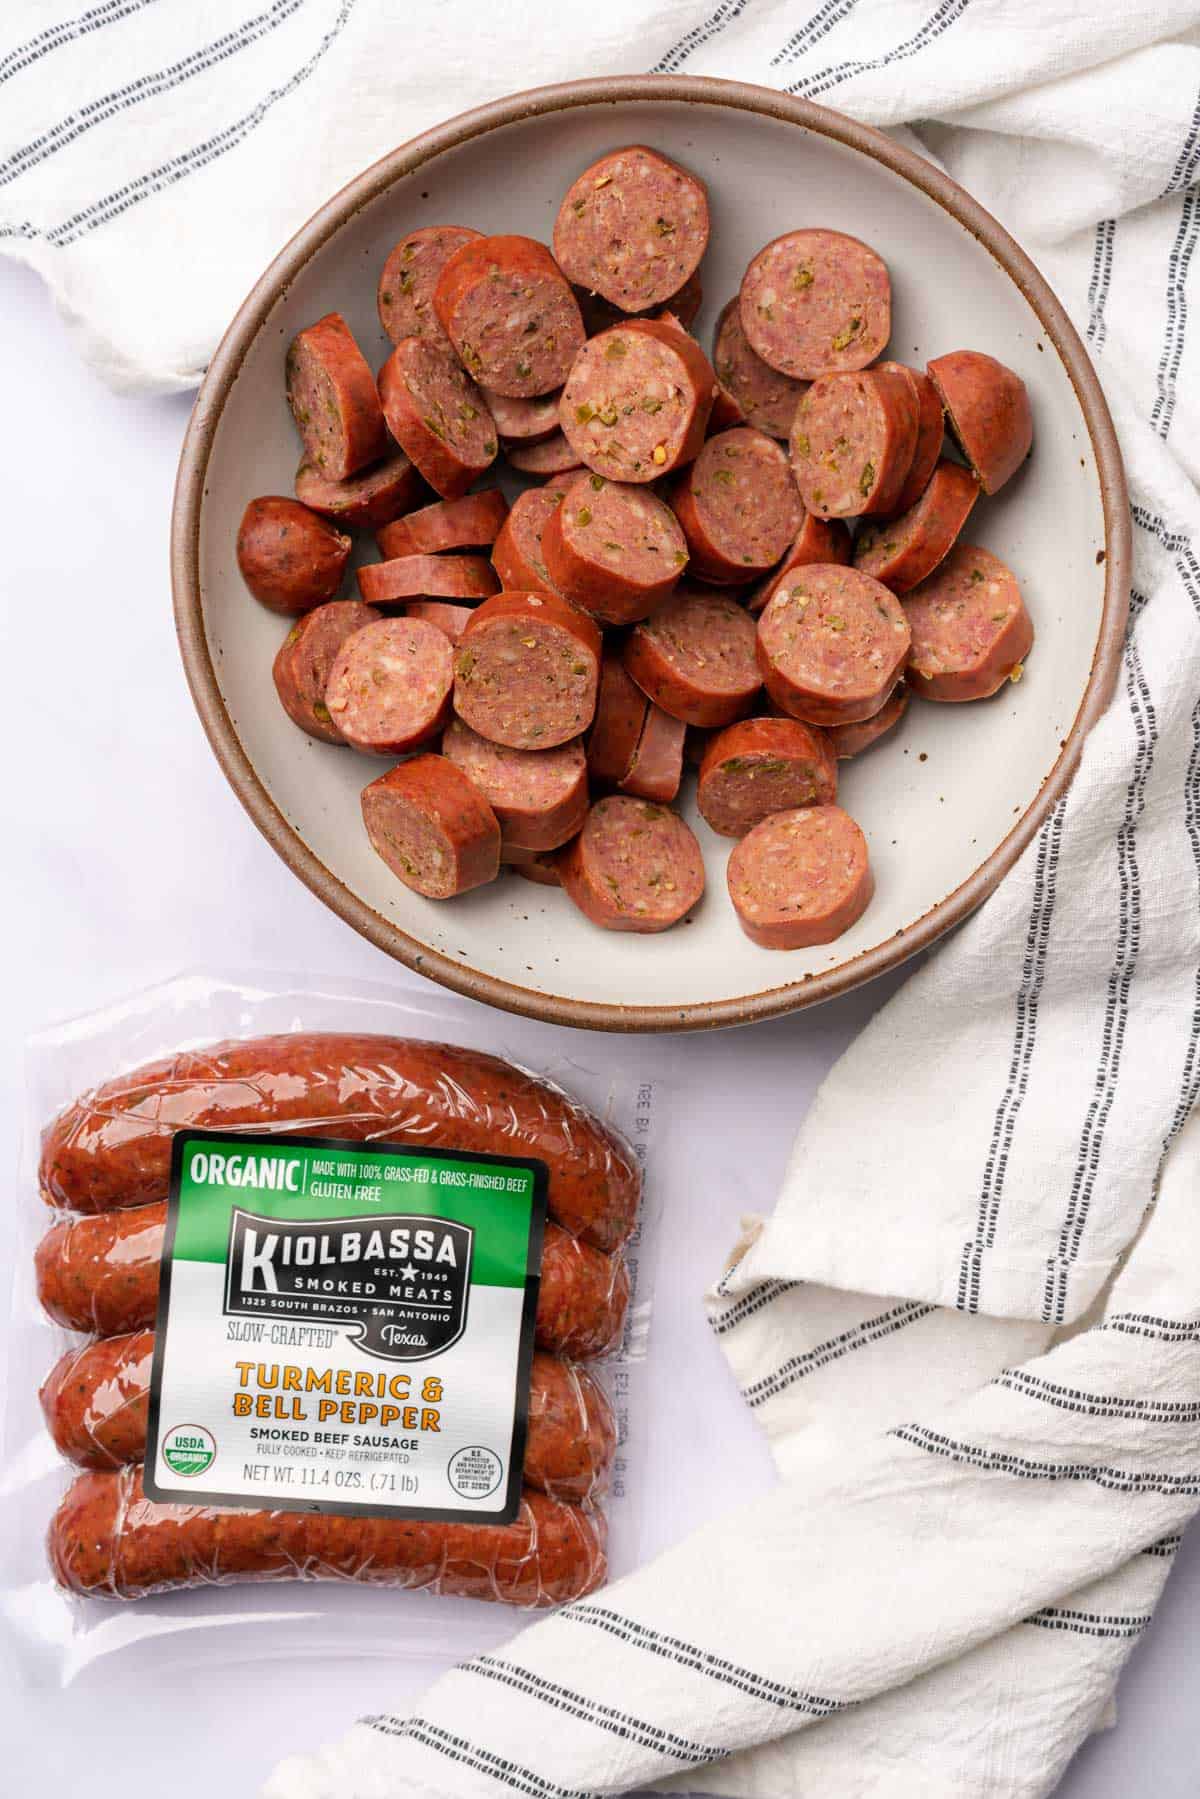 kiolbassa smoked meats turmeric and bell pepper organic beef sausage cut into rounds in a bowl, with a package beside it